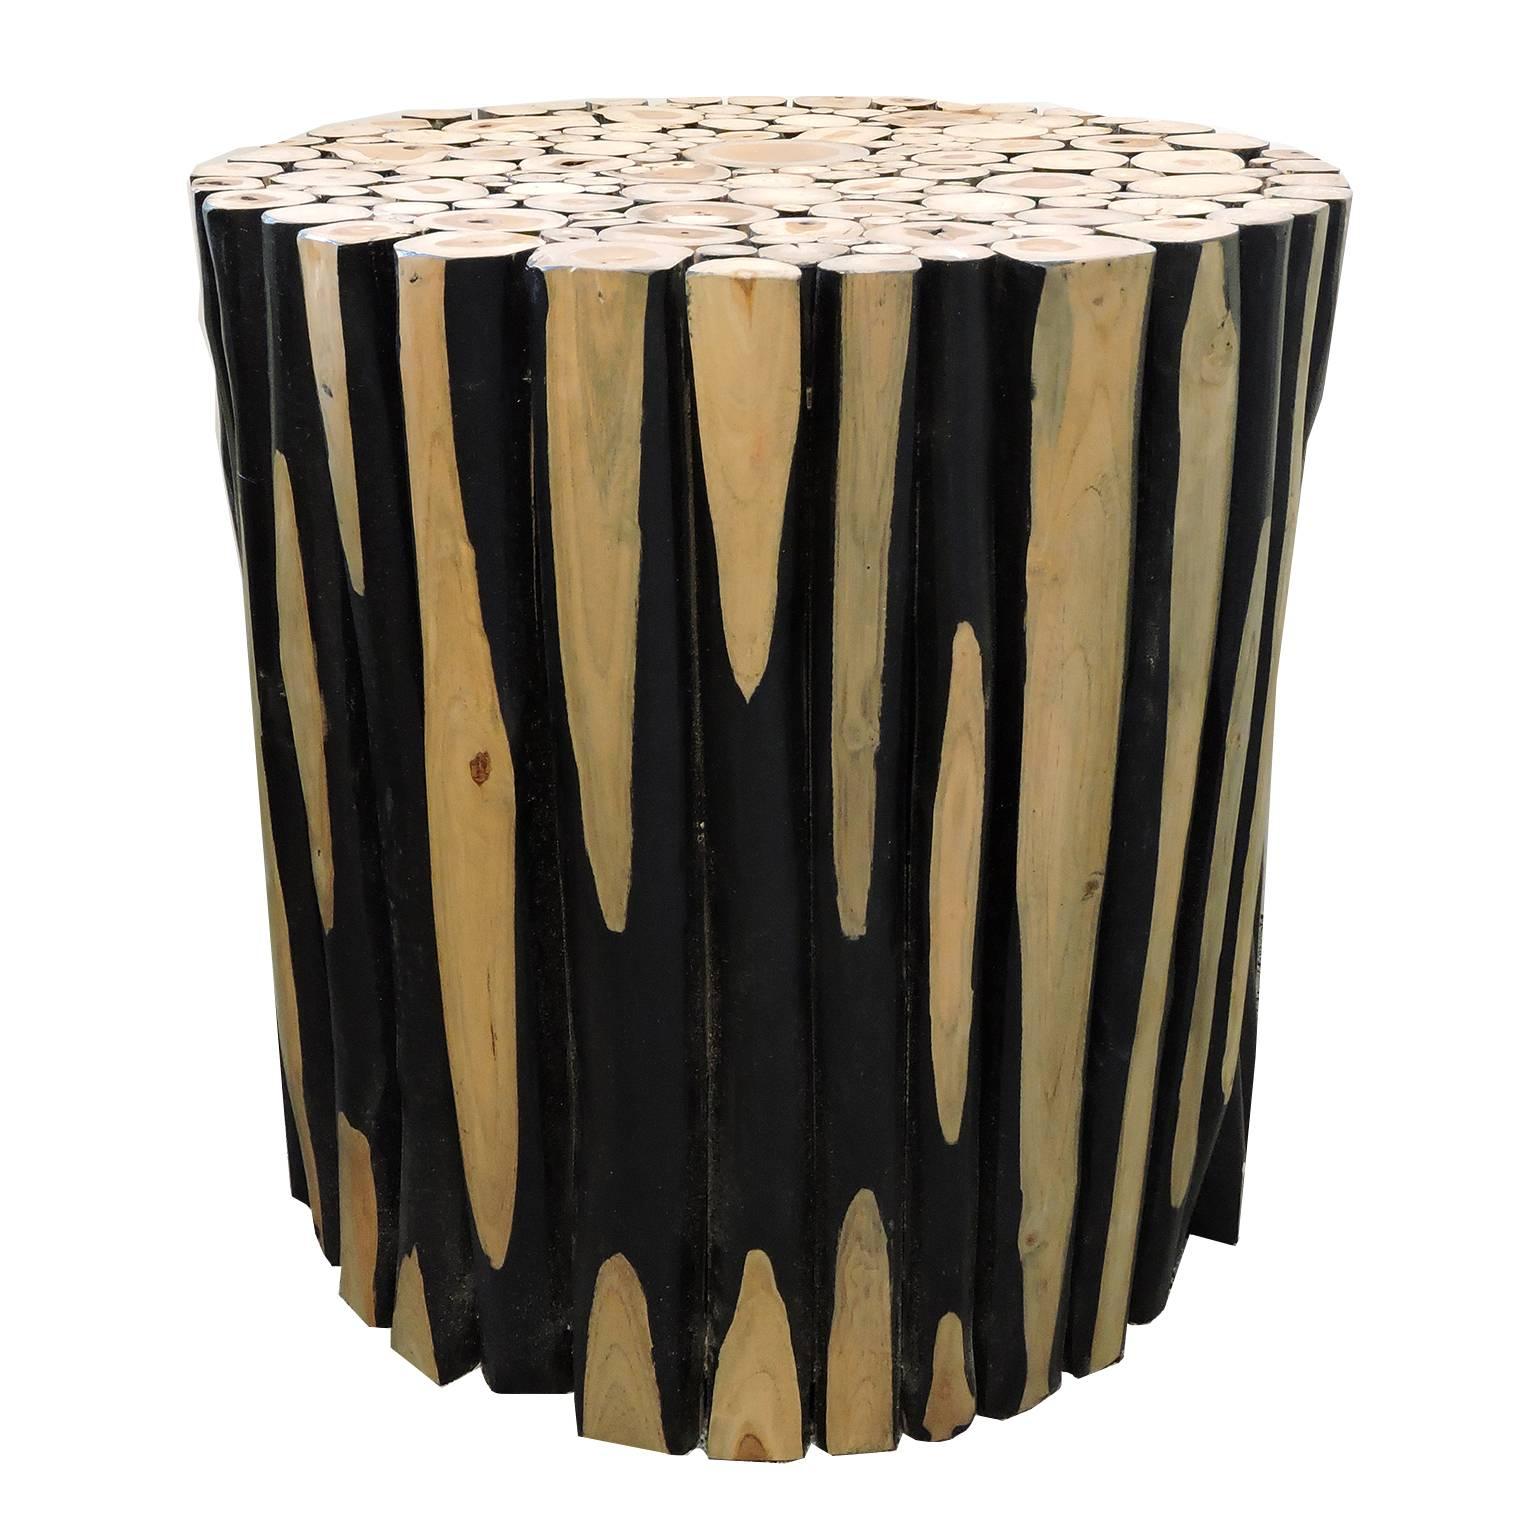 Pair of Mid-Century Modern unusual Rustic log round side tables, constructed of various sized vertical black-painted and planed round logs with the top fitted with cross cut sections forming a millifiori looking wood design.
Measures: Height: 24